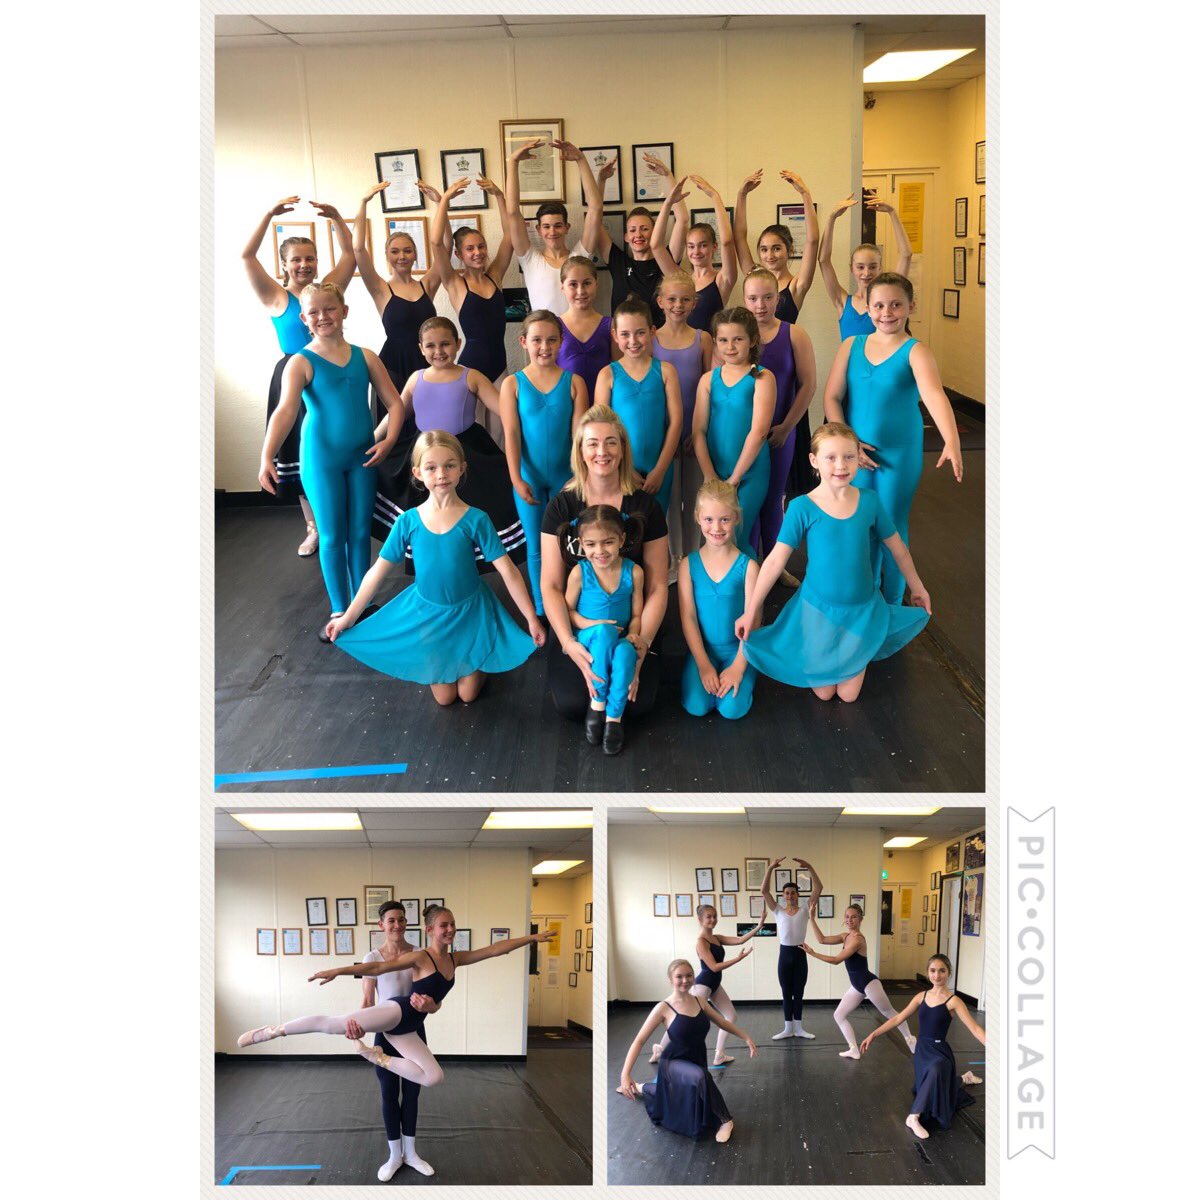 Dancesteps exam success 2018 keep an eye out in the Wigan Evening Post and Wigan Observer #dancesteps #exams #fun #royalacademyofdance #istdmodern #istdtap